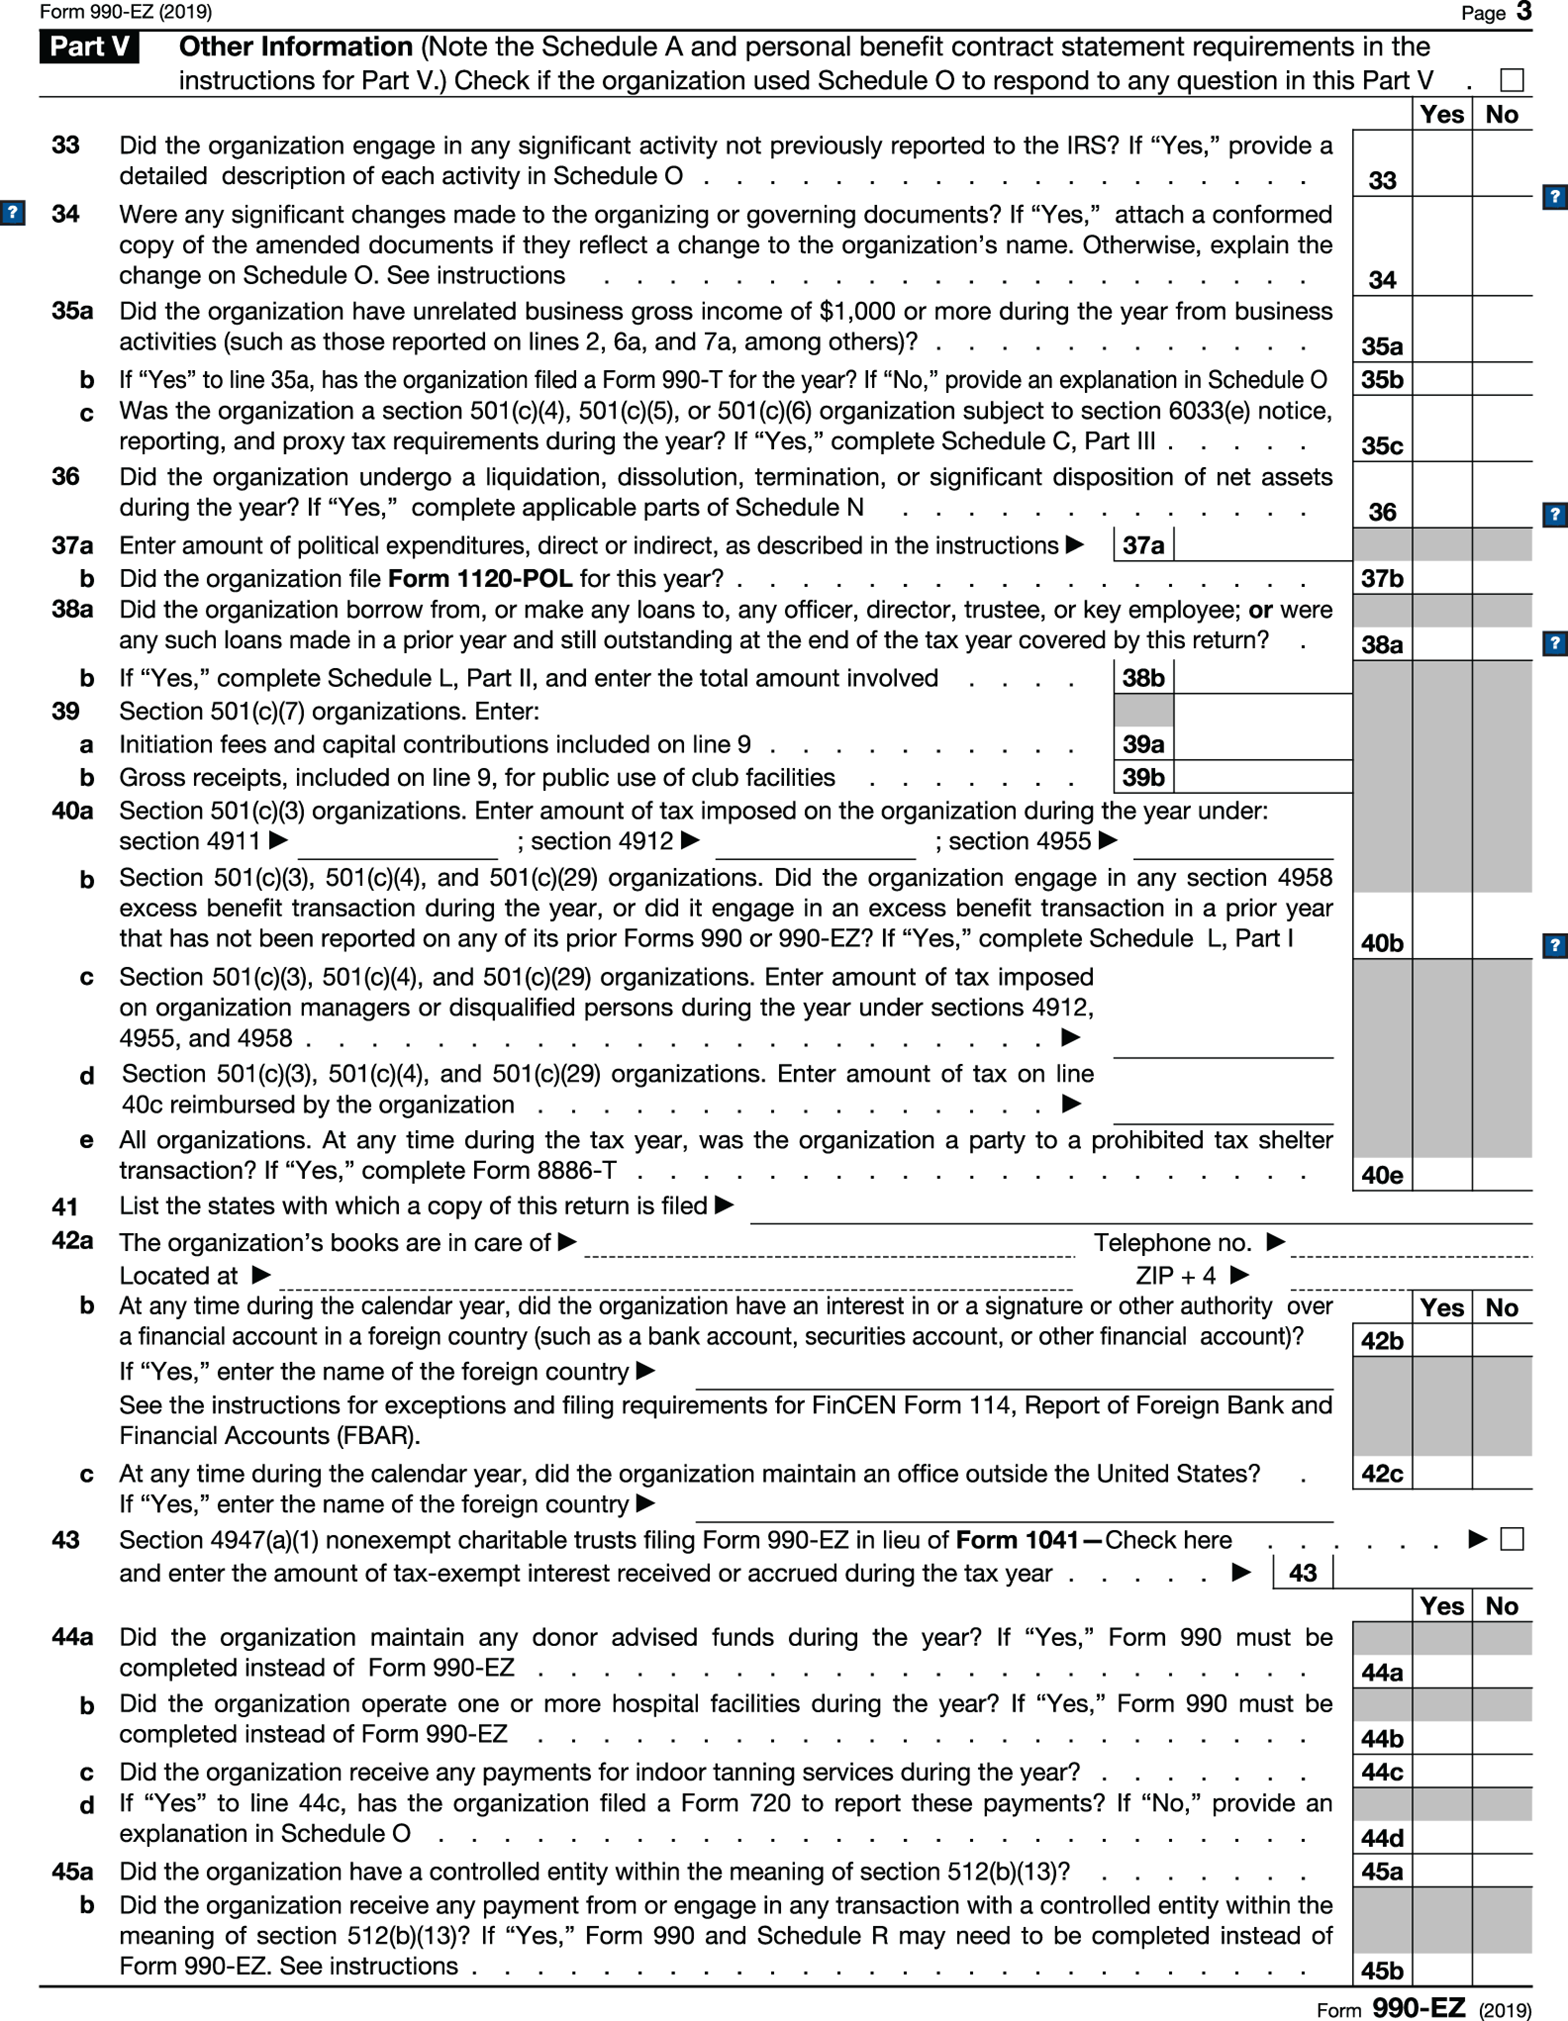 Page 3 of Exhibit 5: Form 990-EZ, Part V, Other Information, to check if the organization used Schedule O, to be filled in, for the calendar year 2018.